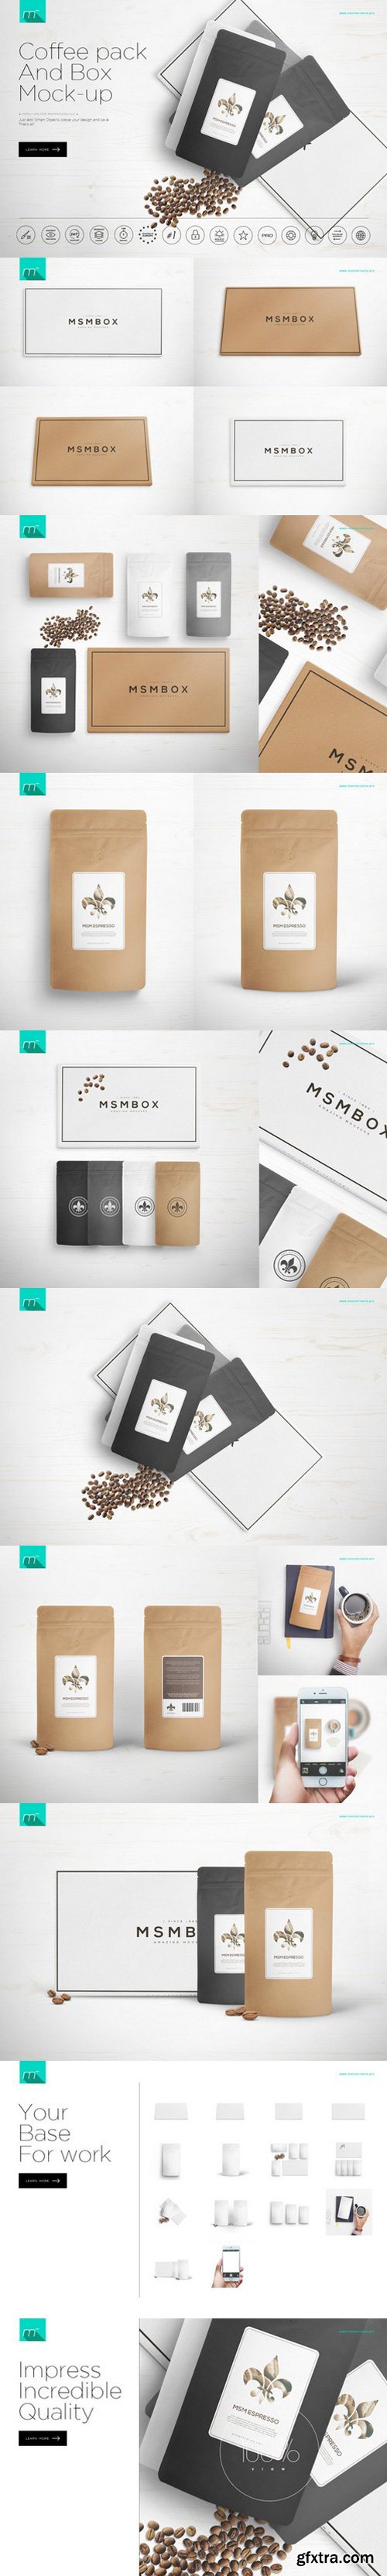 CM - Coffee Pack and Box Mock-up 657975